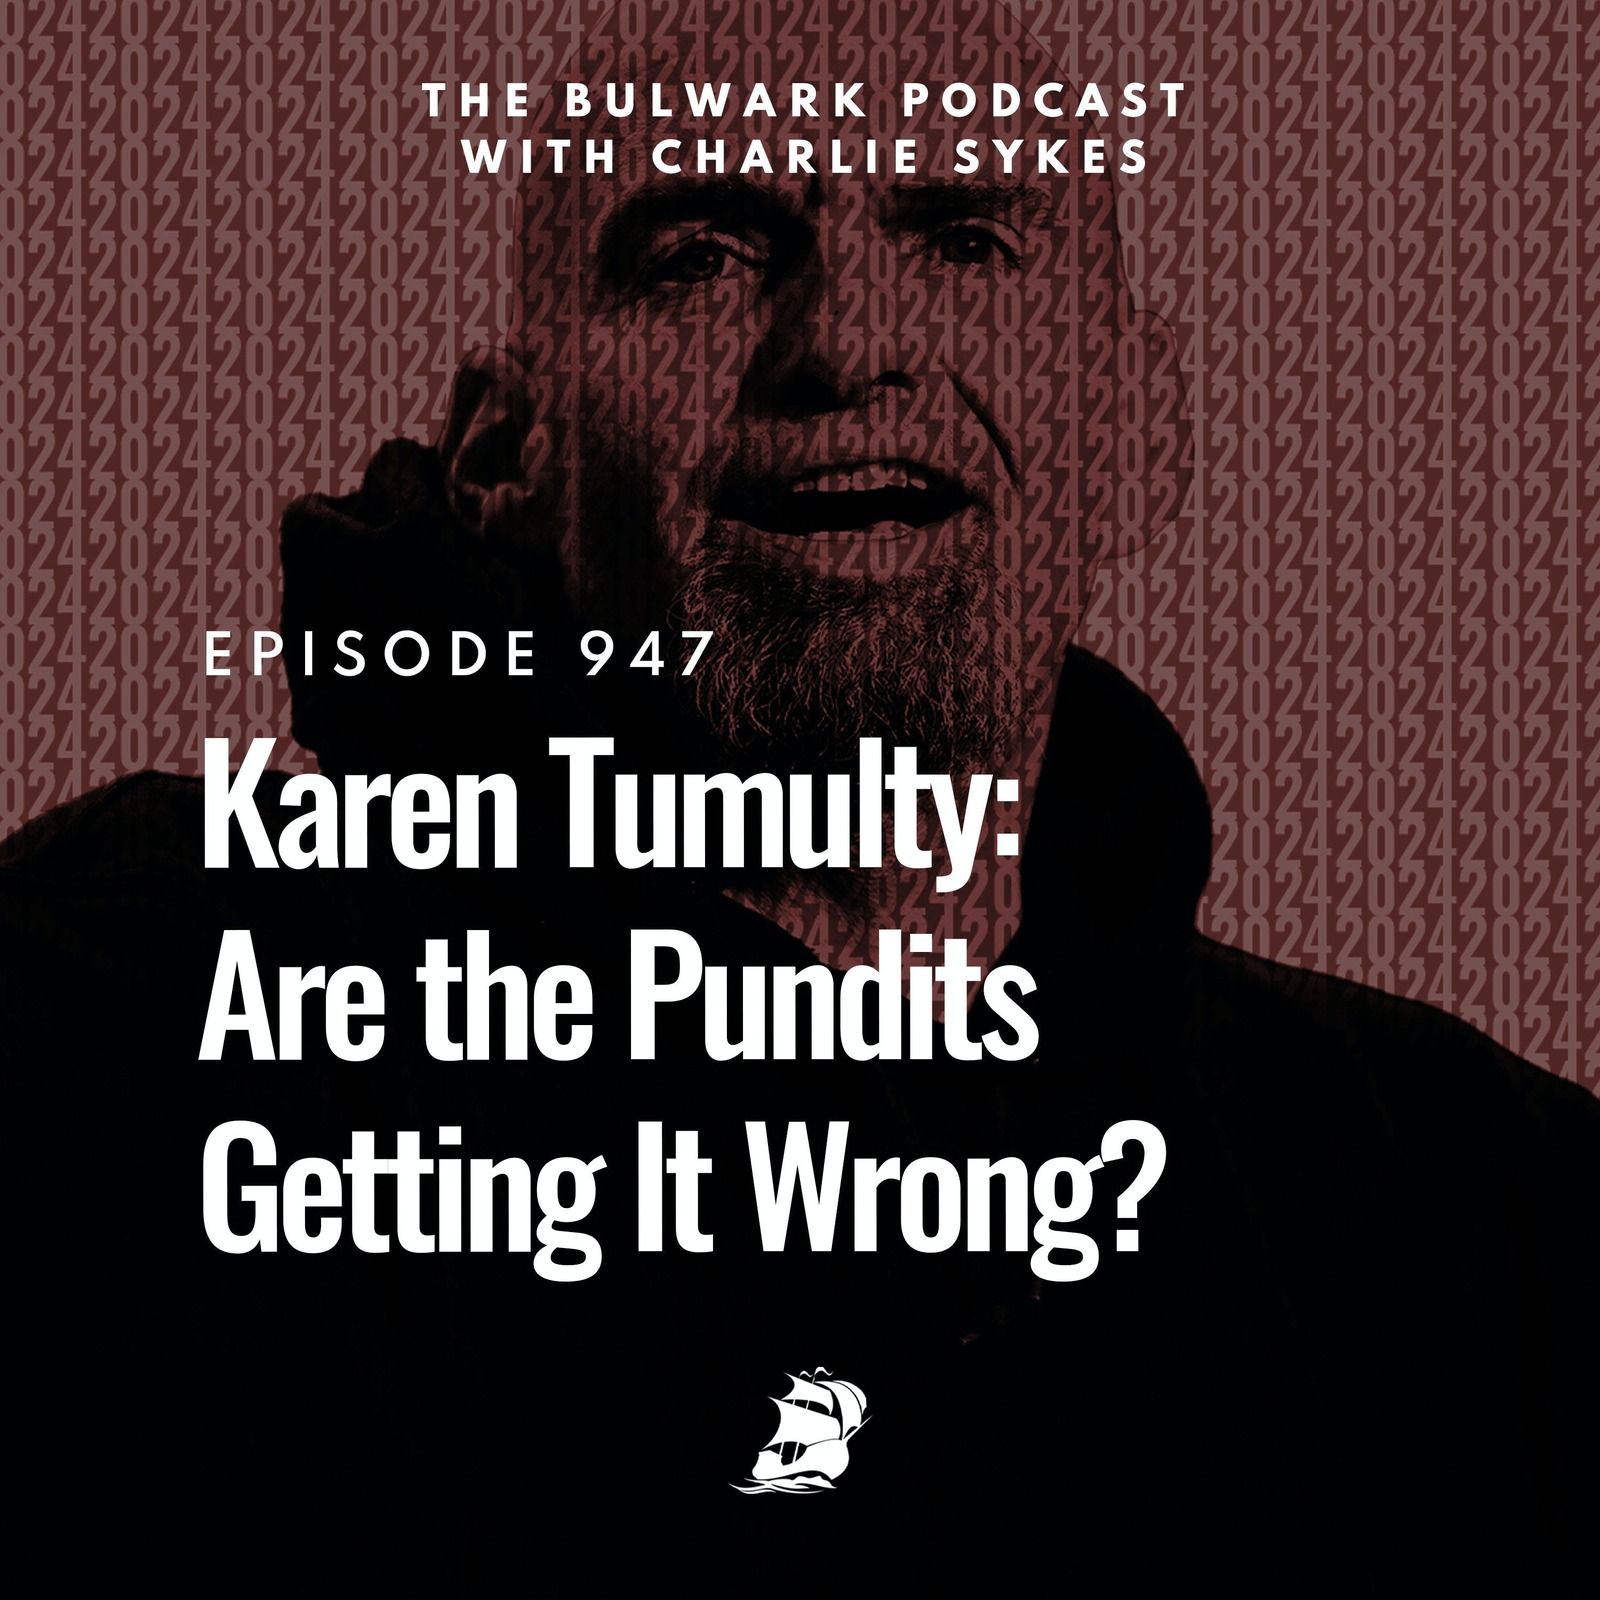 Karen Tumulty: Are the Pundits Getting It Wrong? by The Bulwark Podcast